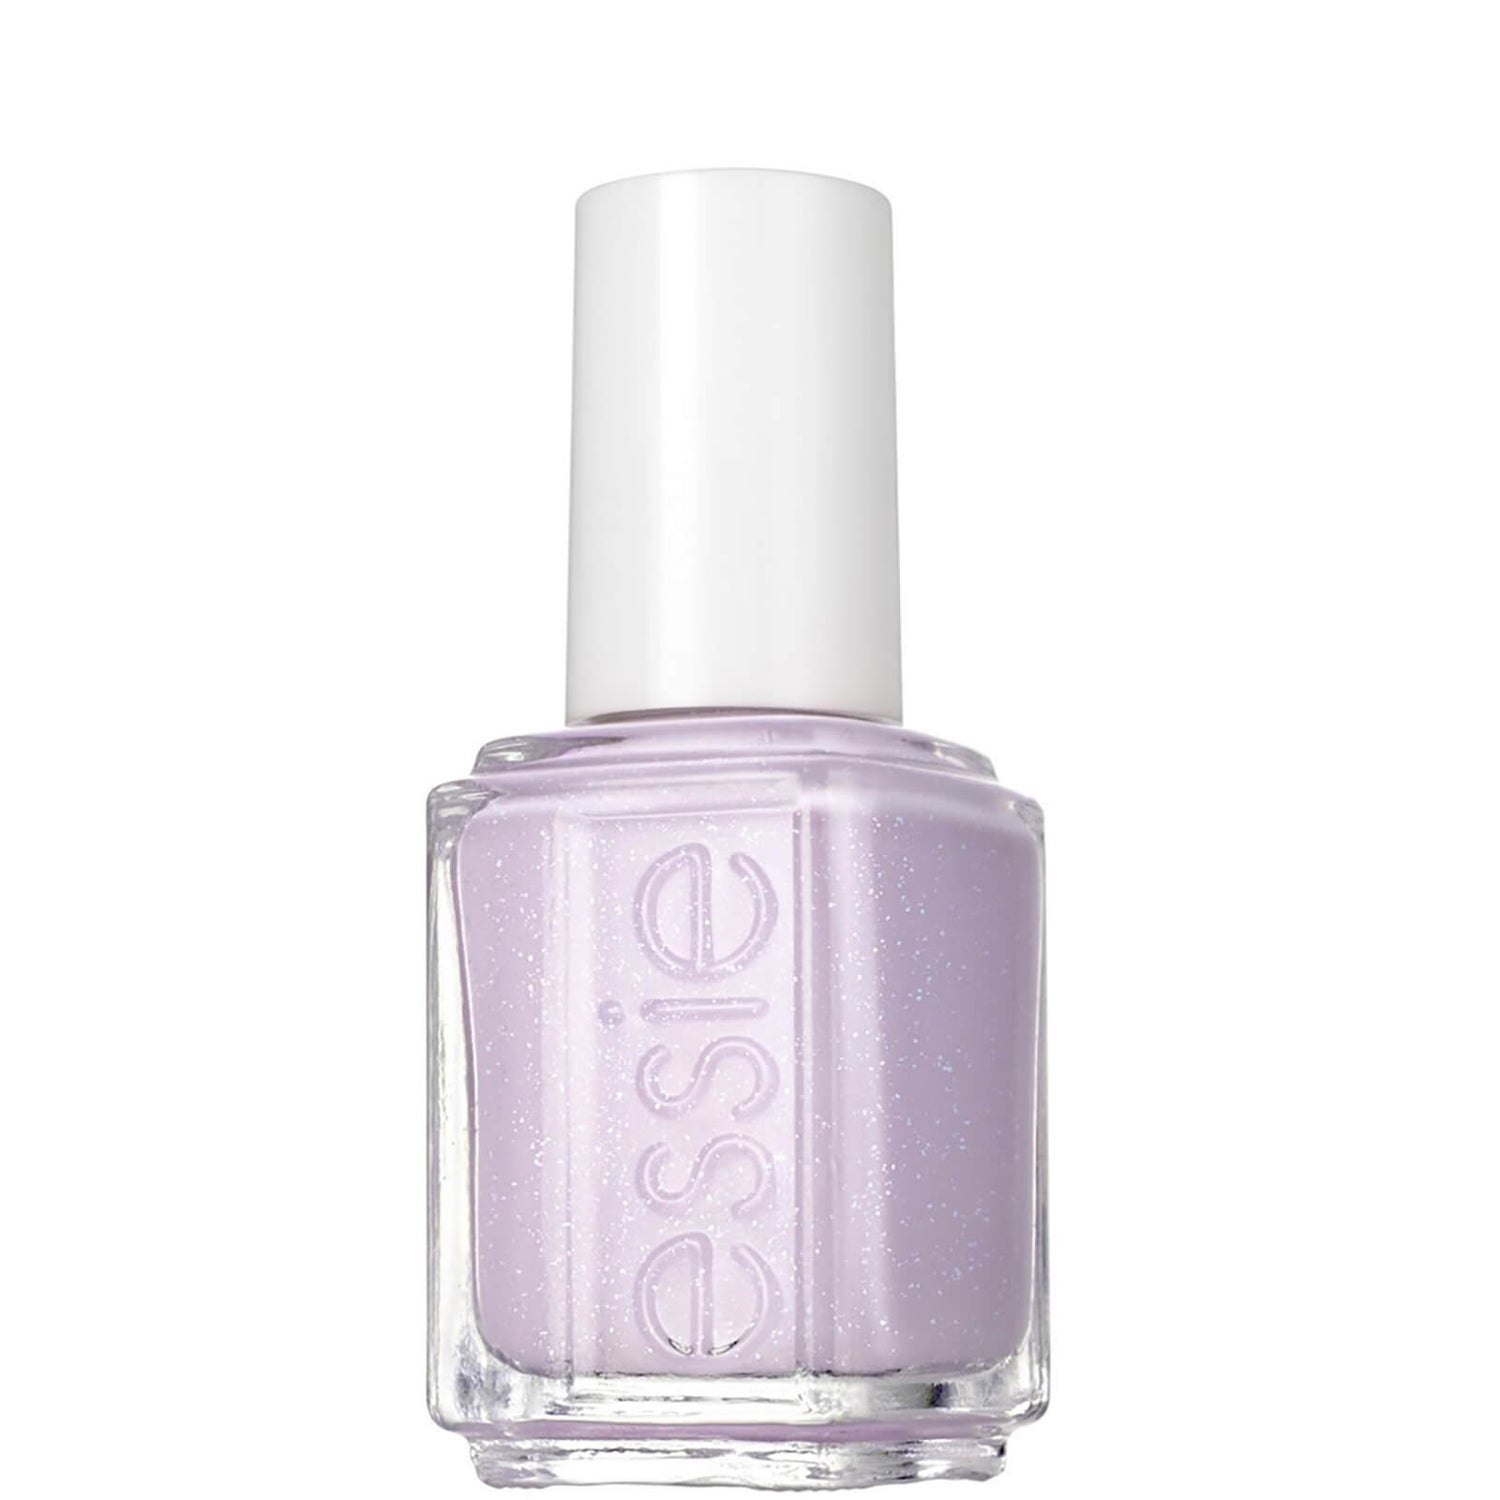 essie To Buy Or Not To Buy 15ml